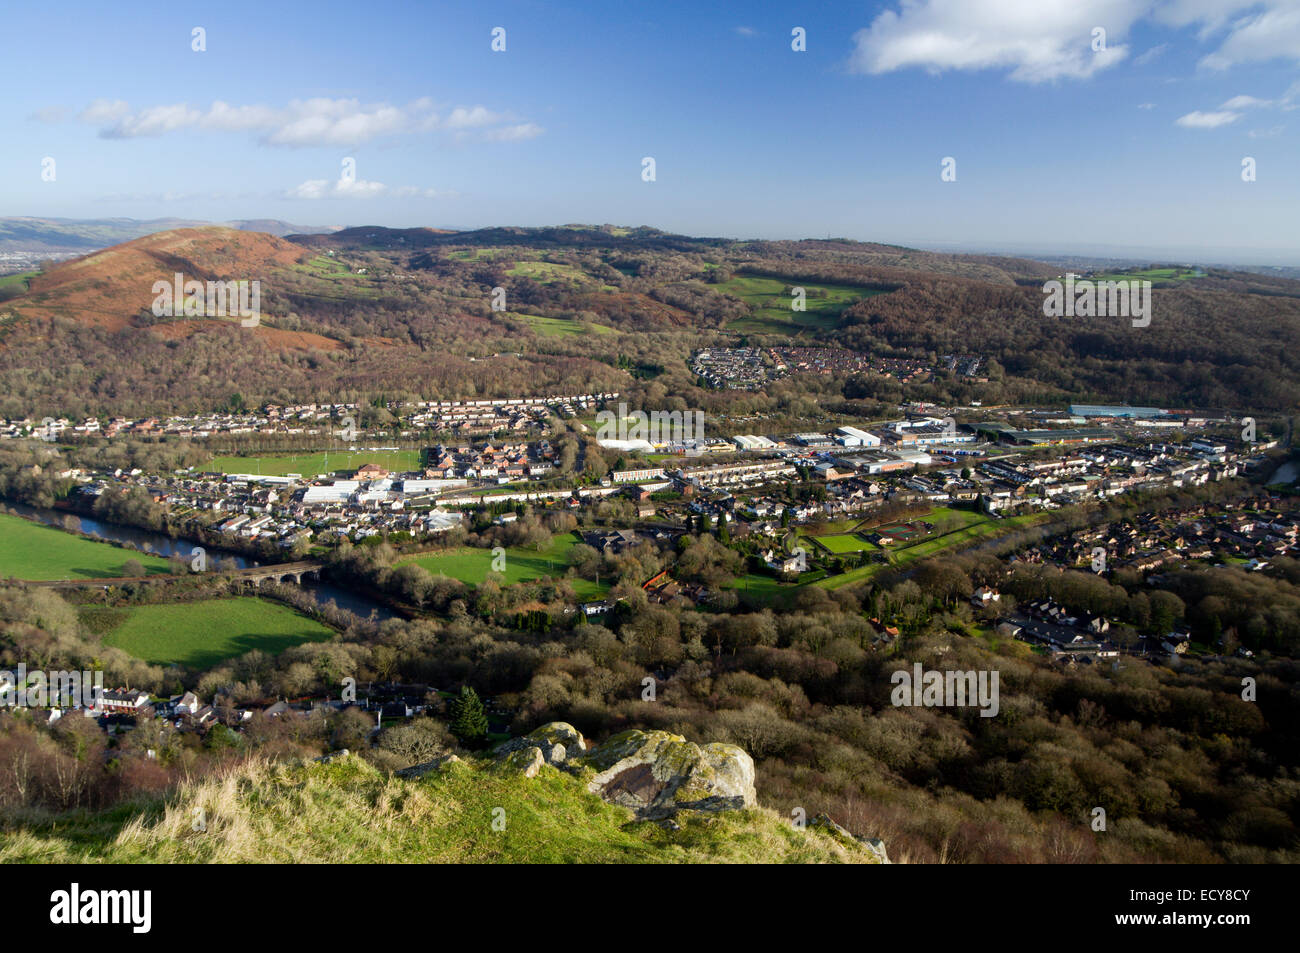 View across the Taff Vale from the Garth Mountain above Taffs Well, South Wales, Valleys, UK. Stock Photo